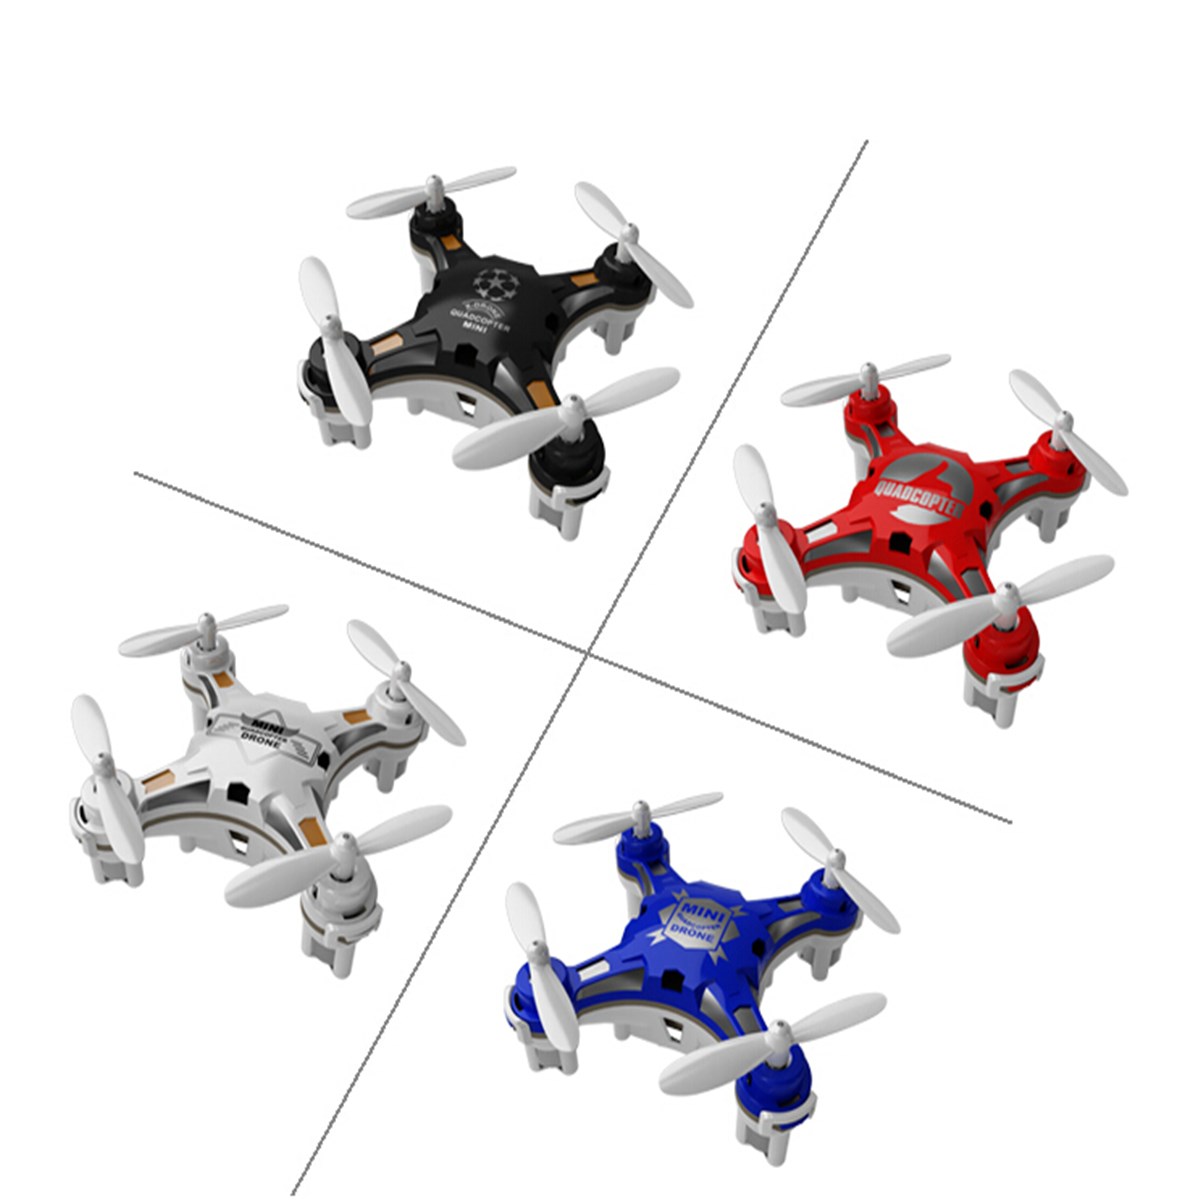 New Hot Sale FQ777 124 Pocket Drone 4CH 6Axis Gyro Quadcopter With Switchable Controller RTF Remote